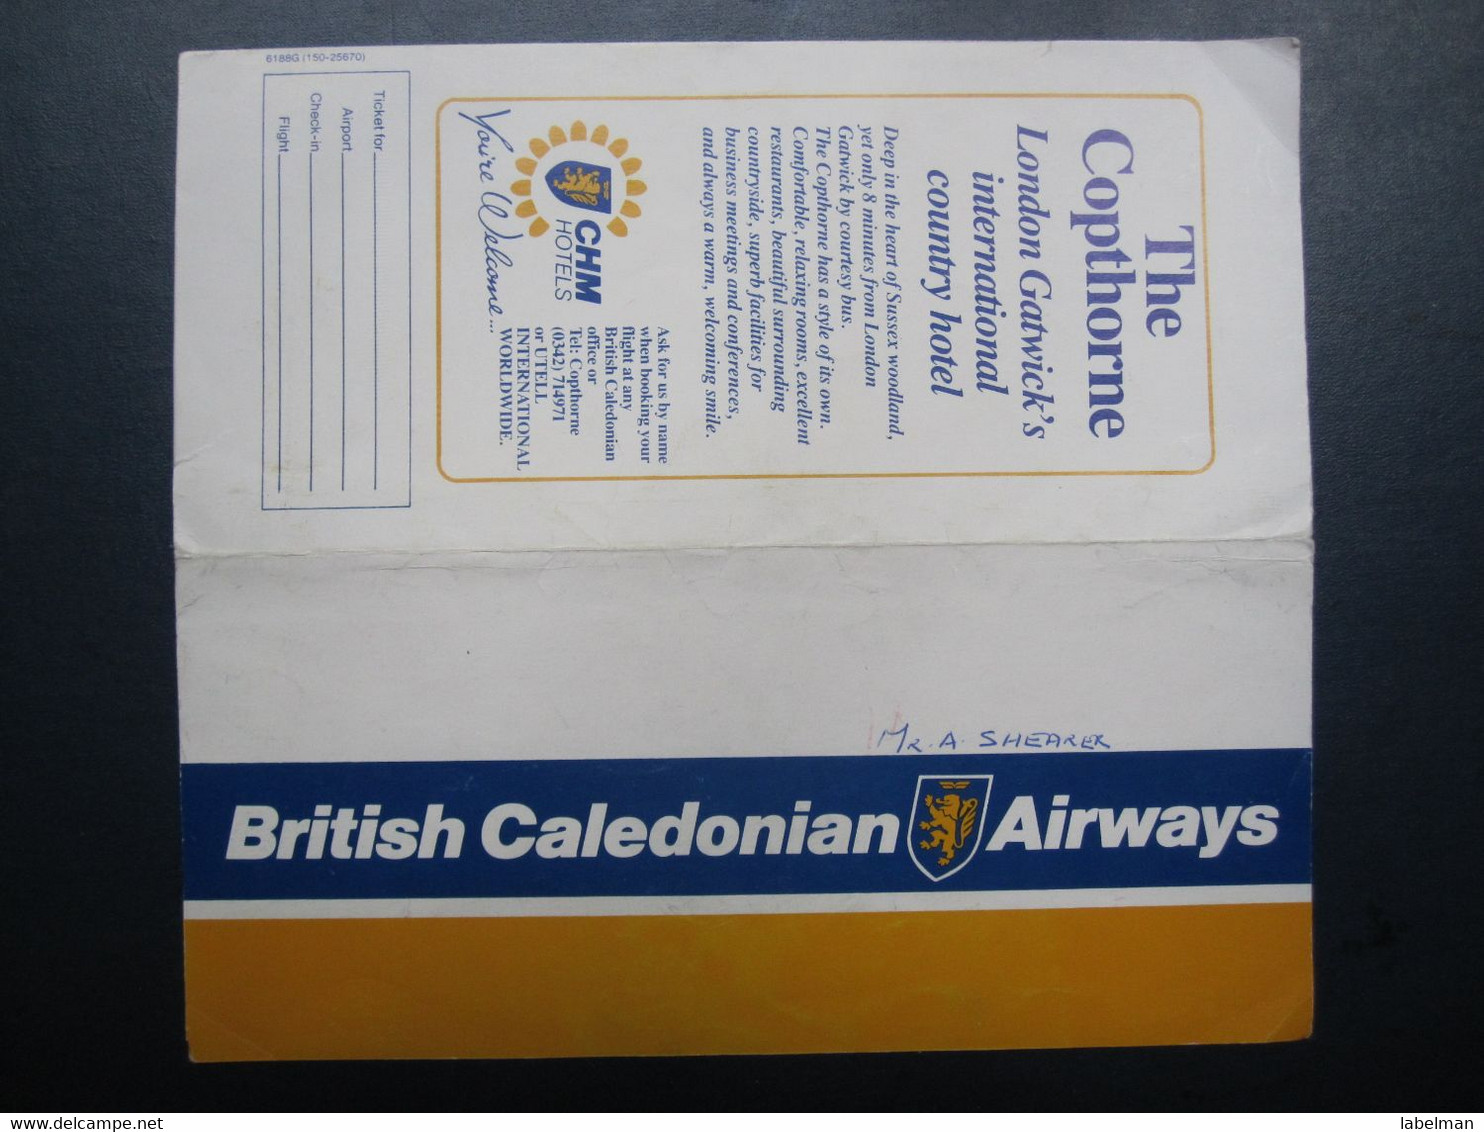 BRITISH CALEDONIAN UK AVIATION AIRWAYS AIRLINE TICKET HOLDER BOOKLET VIP TAG LUGGAGE BAGGAGE PLANE AIRCRAFT AIRPORT - World